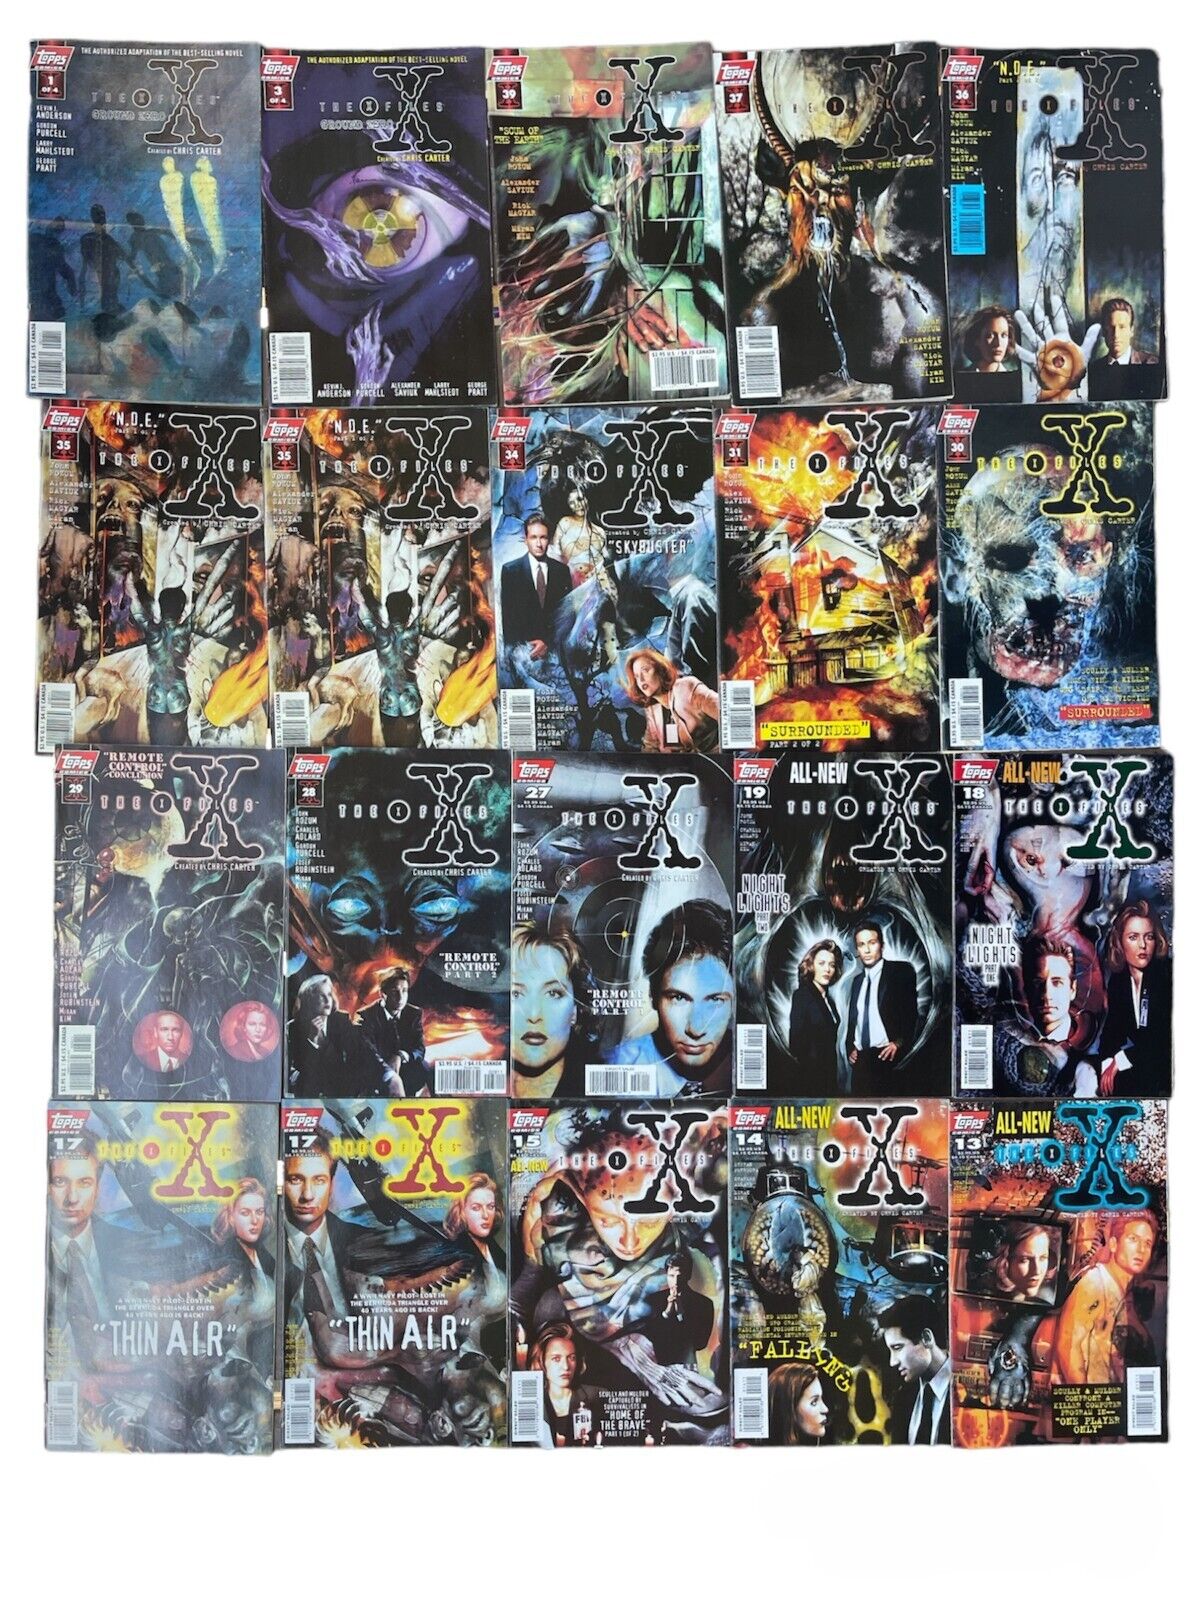 Lot of 31 assorted X-Files comics and graphic novels from ~90s-00\'s